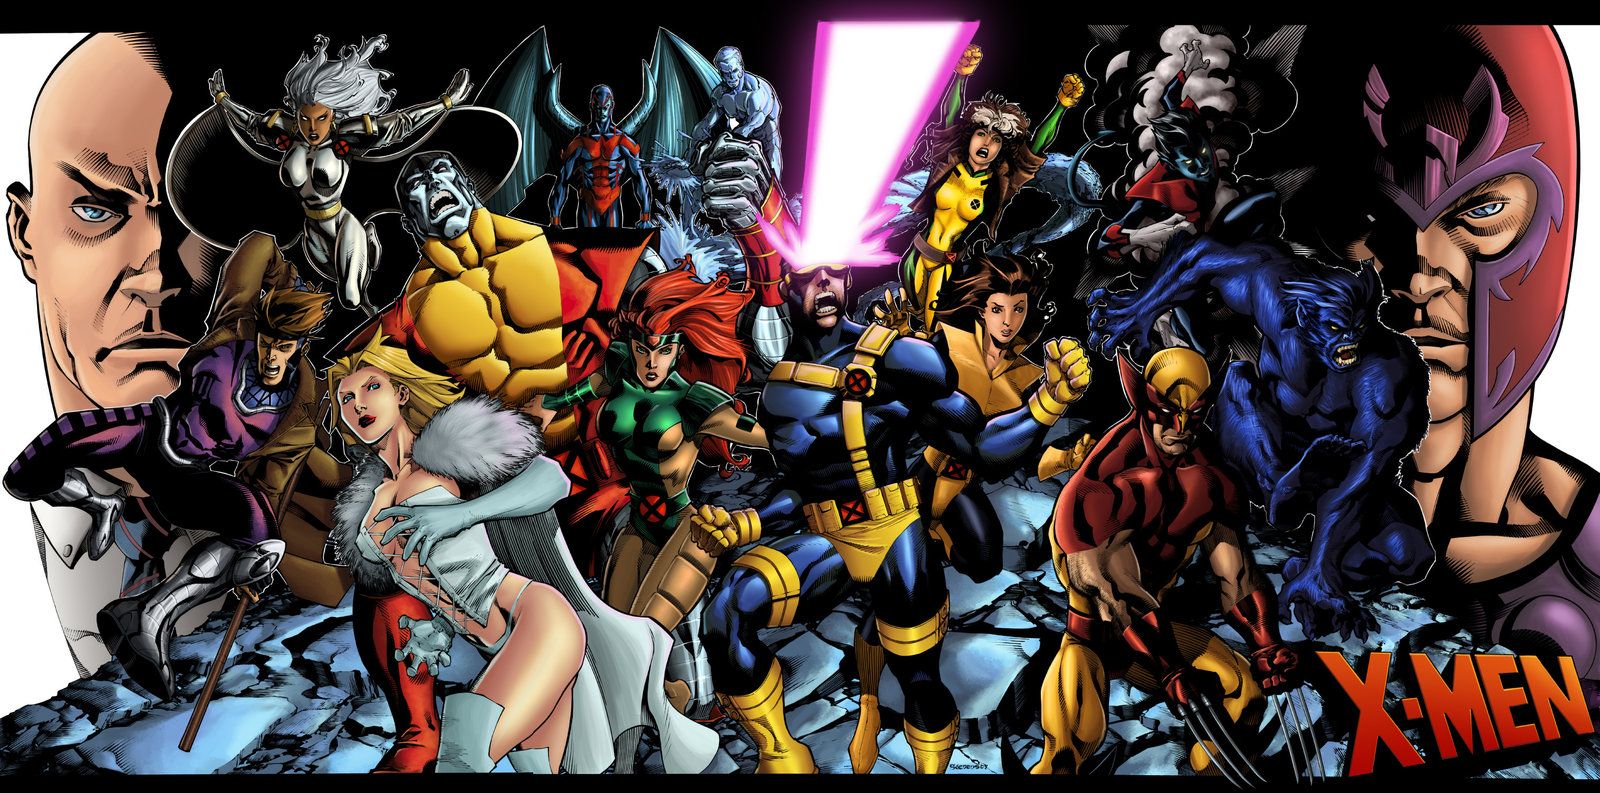 That is what the Xmen are to me the 616 Xmen that is The standard